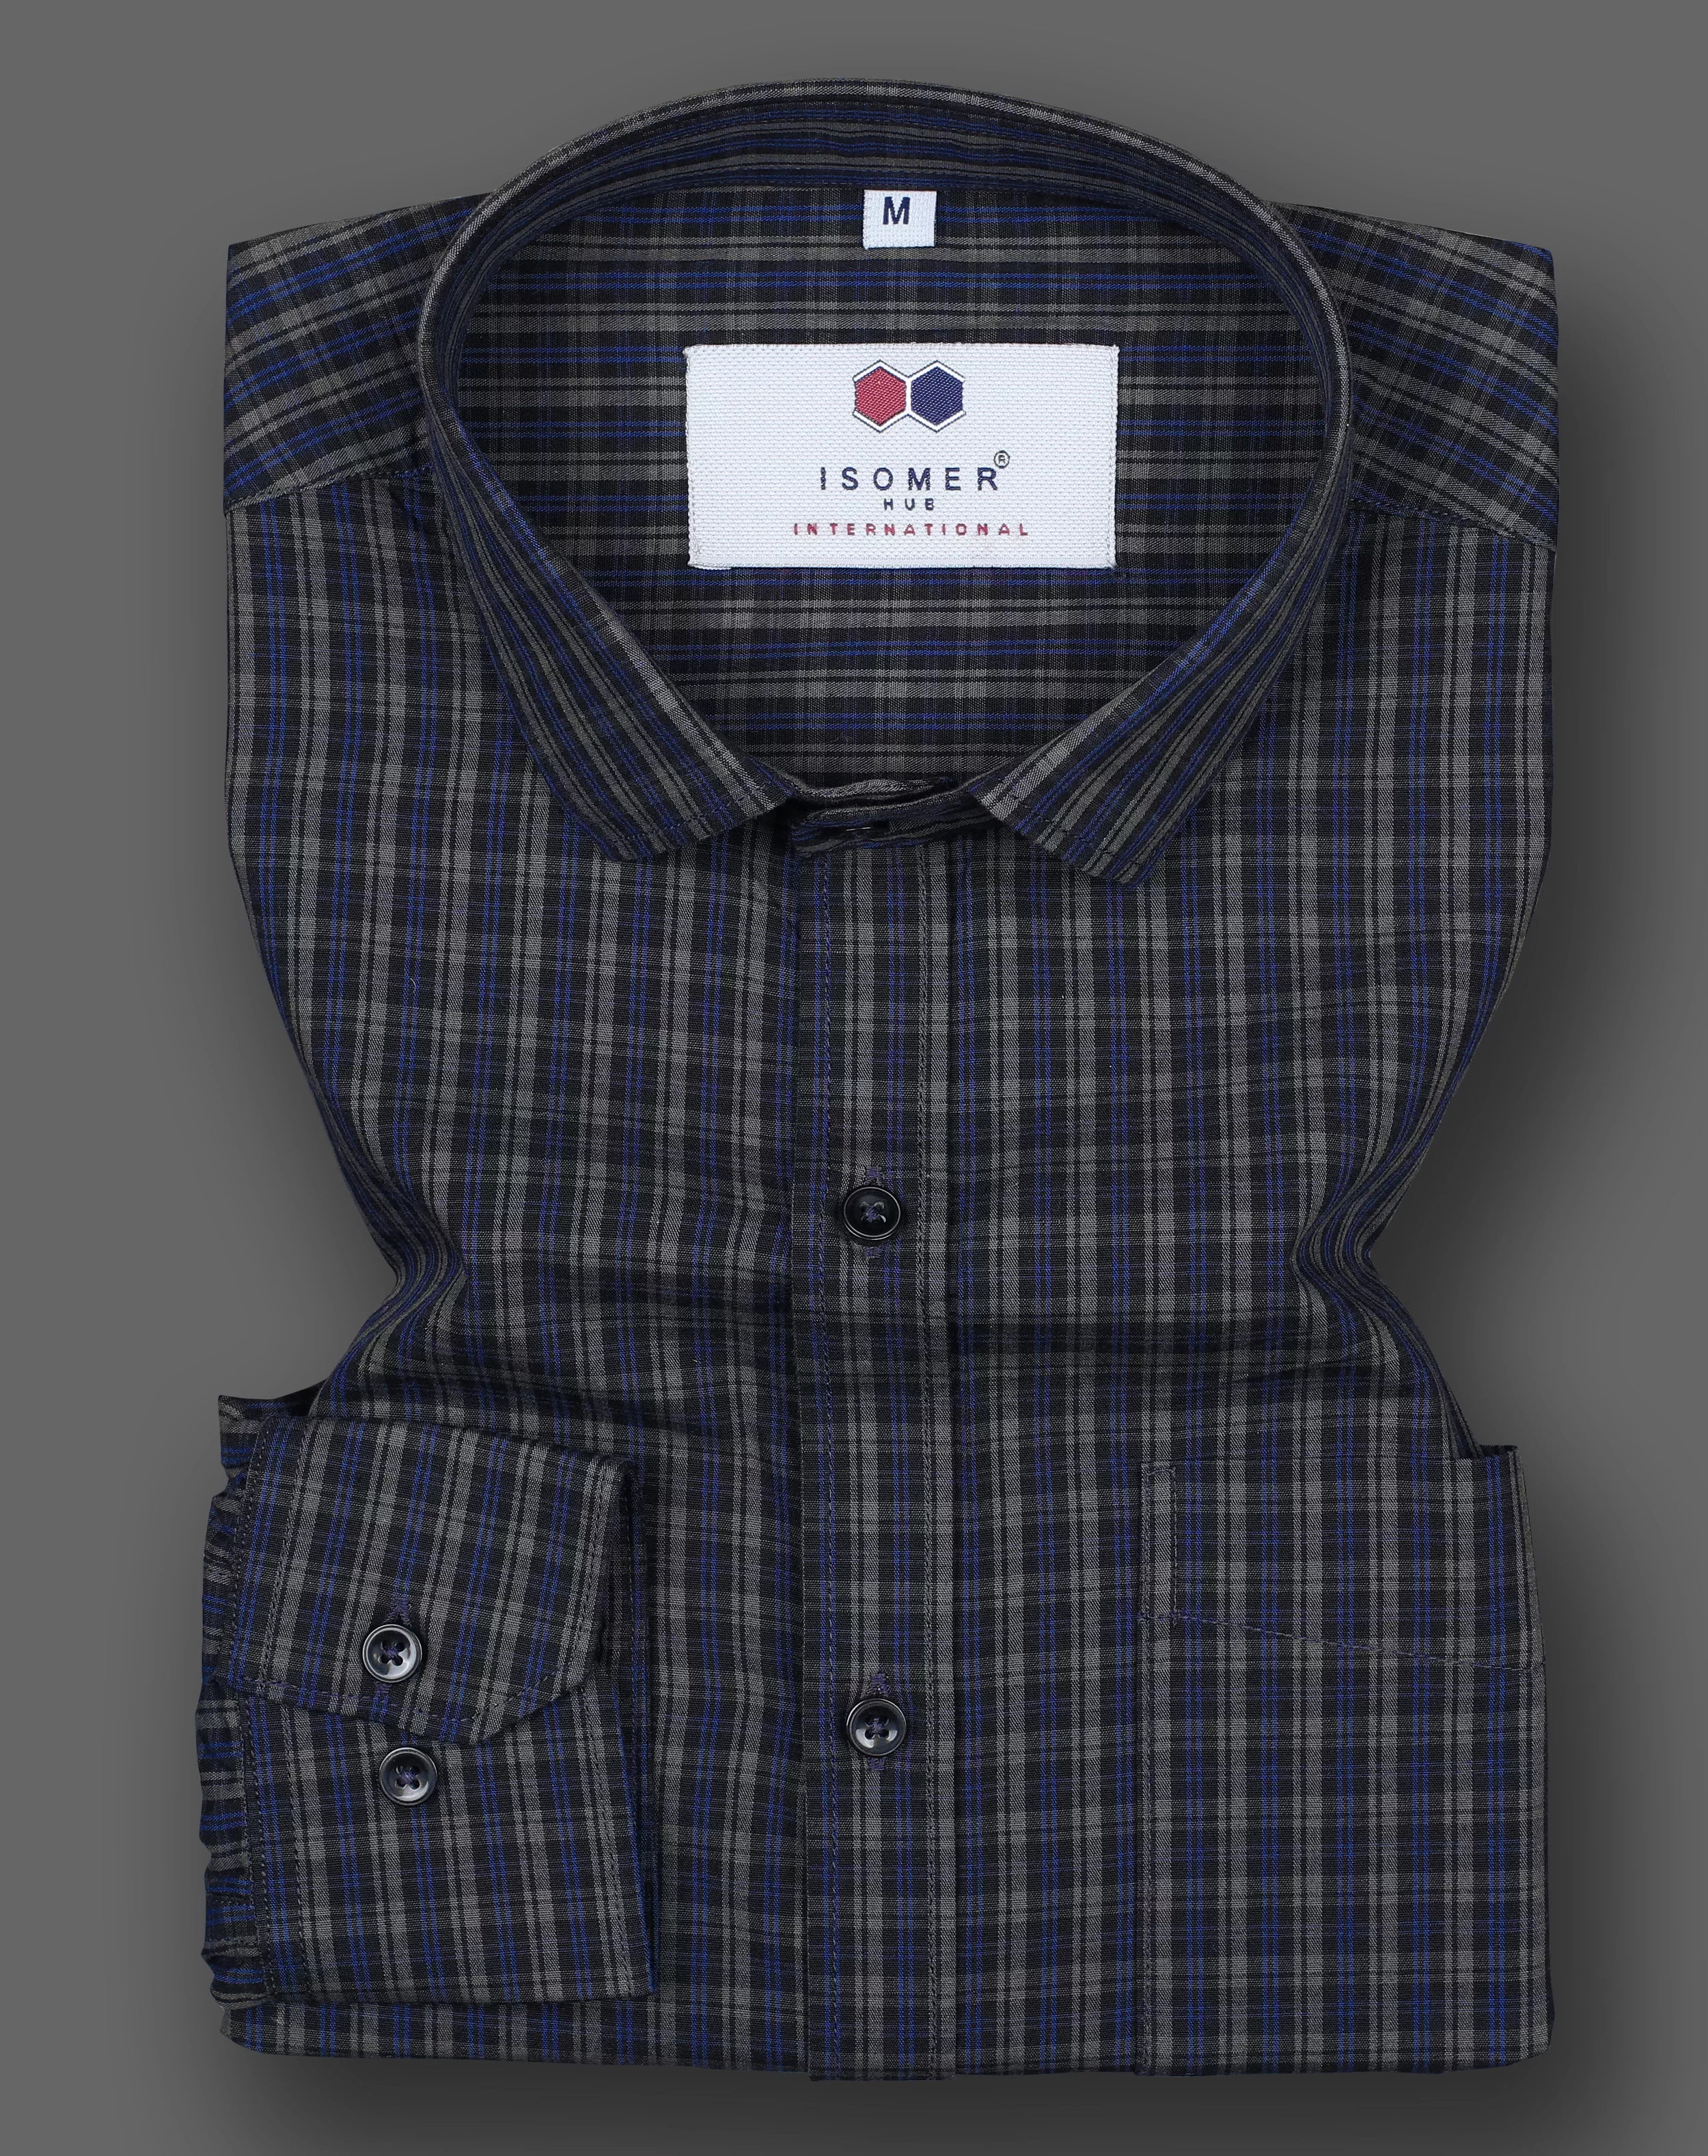 Black With Grey And Blue Tartan Checked Spread Collar Shirt